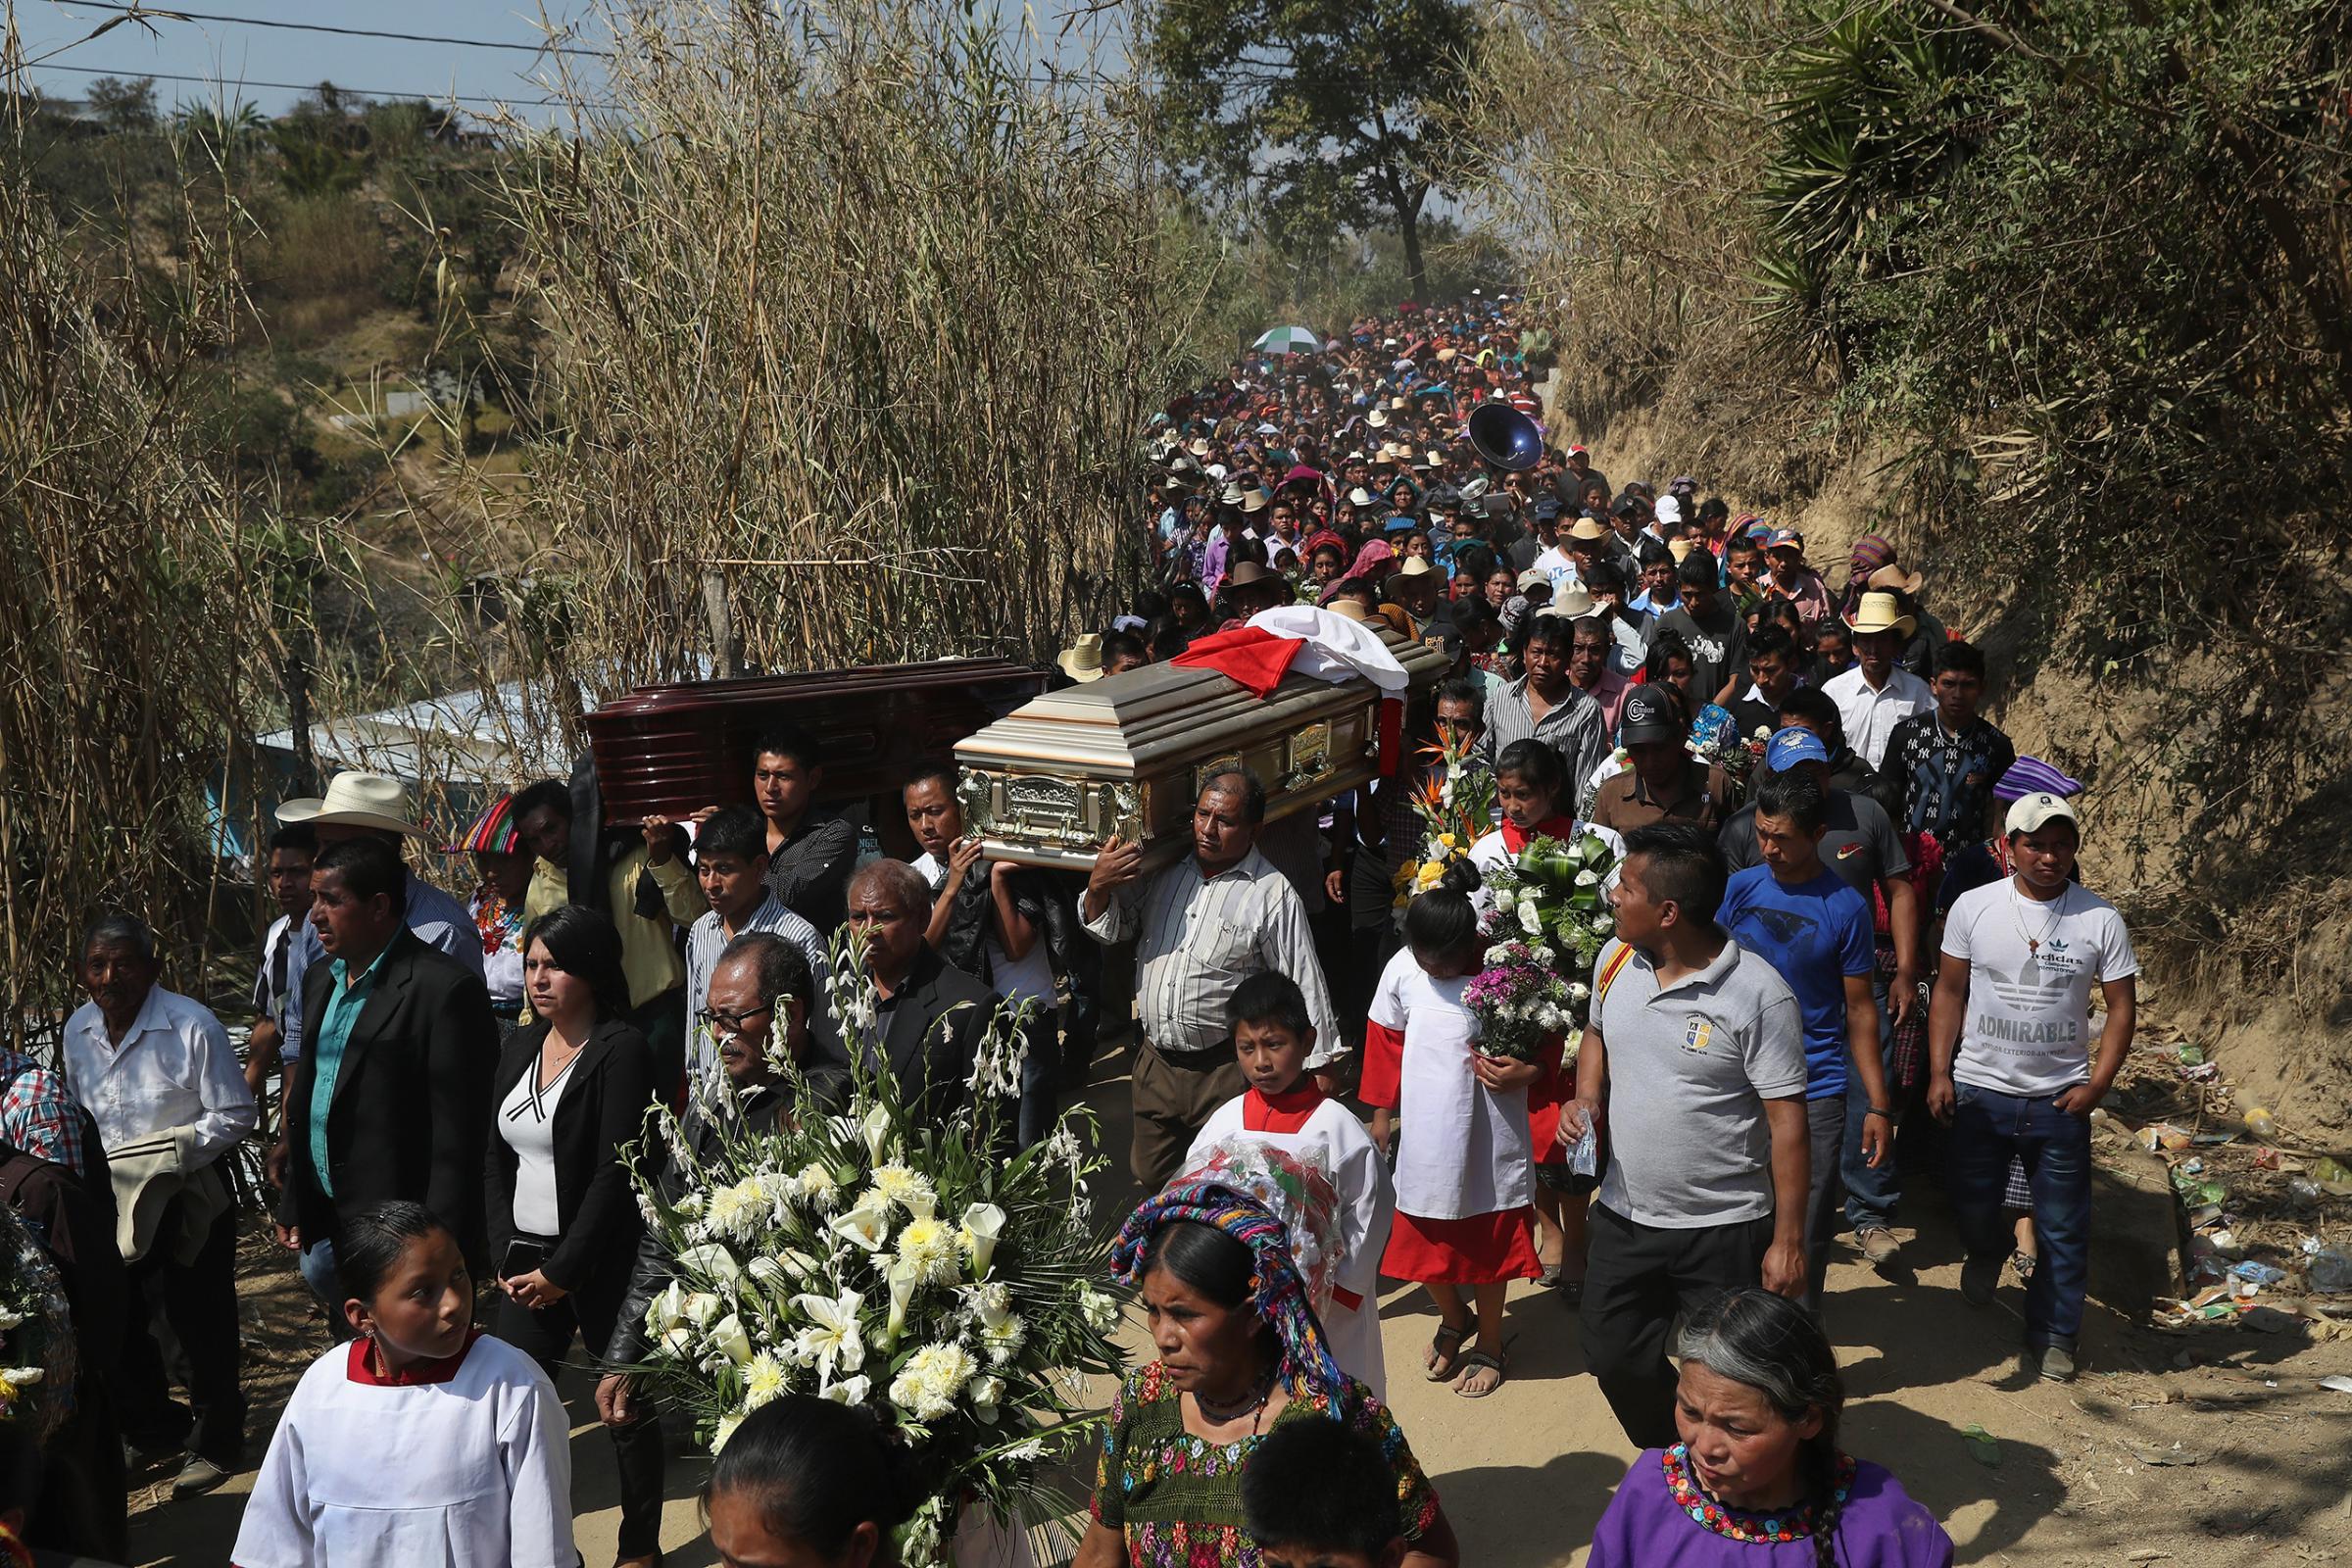 Relatives carry the caskets of two boys who were kidnapped and killed in San Juan Sacatepéquez on Feb. 14, 2017. More than 2,000 people walked in the funeral procession.